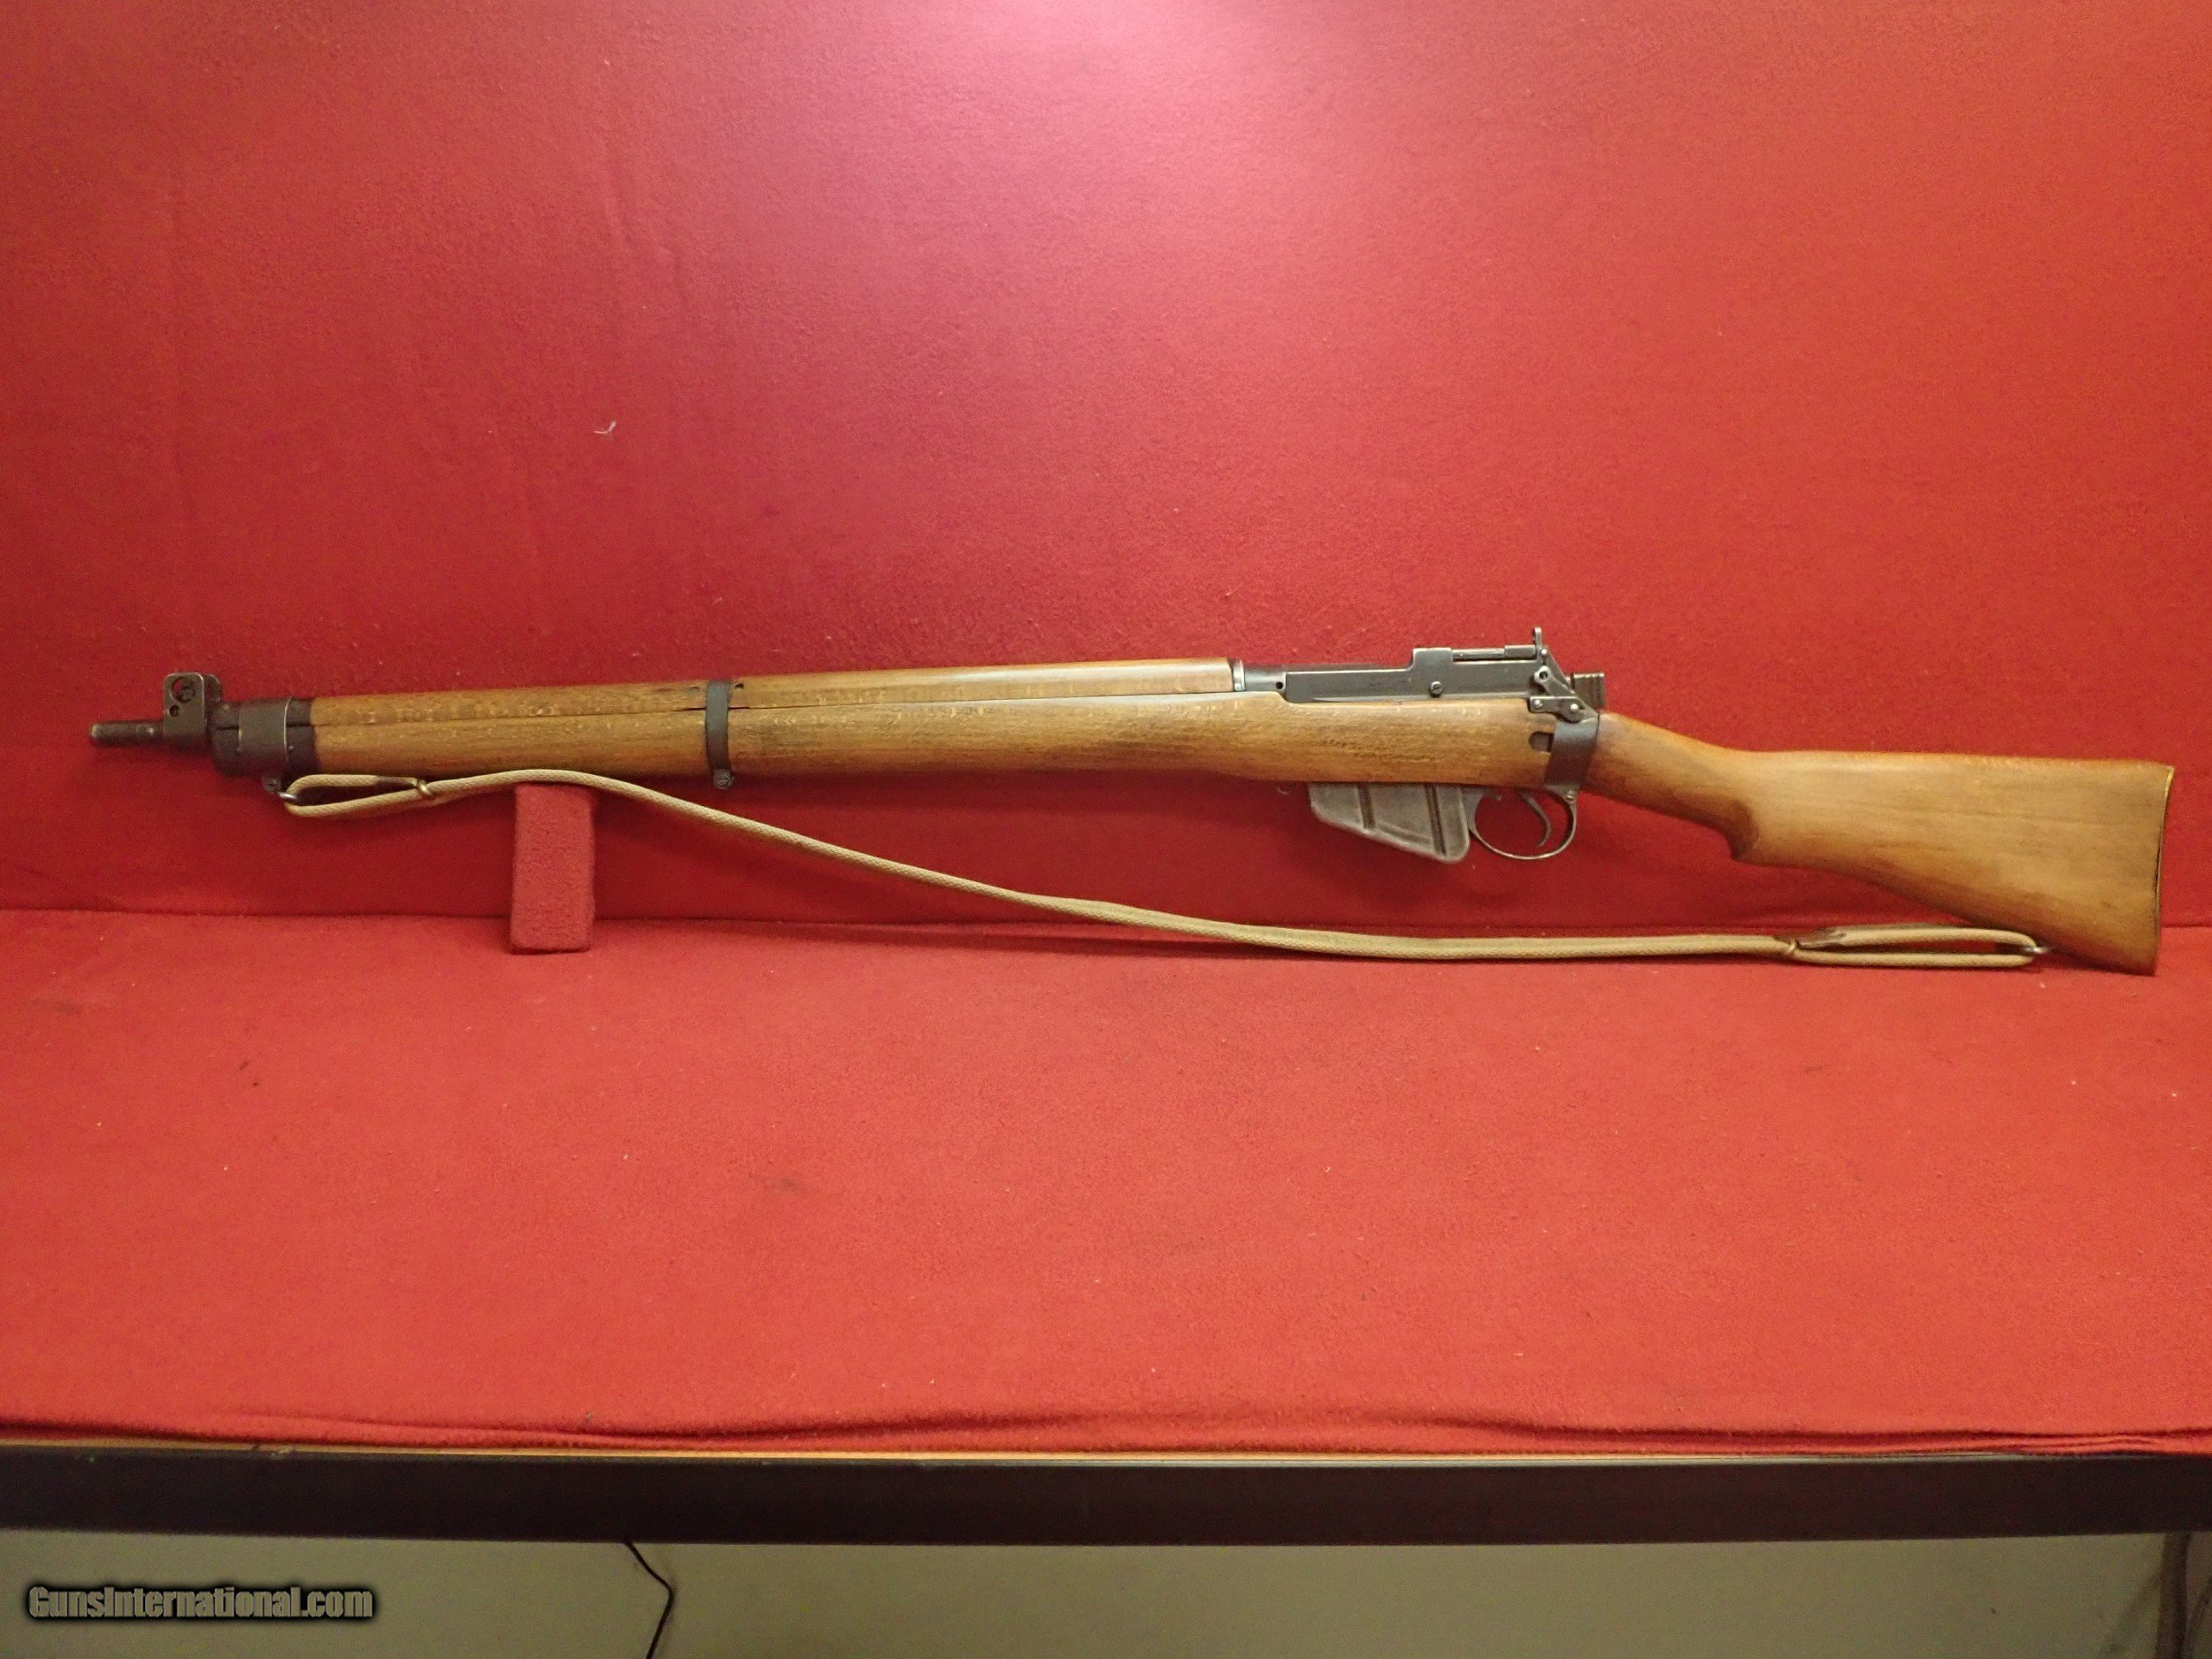 NO 4 MK1 LONG BRANCH 1943, BOLT ACTION RIFLE SERIAL #27L8103 - Able Auctions